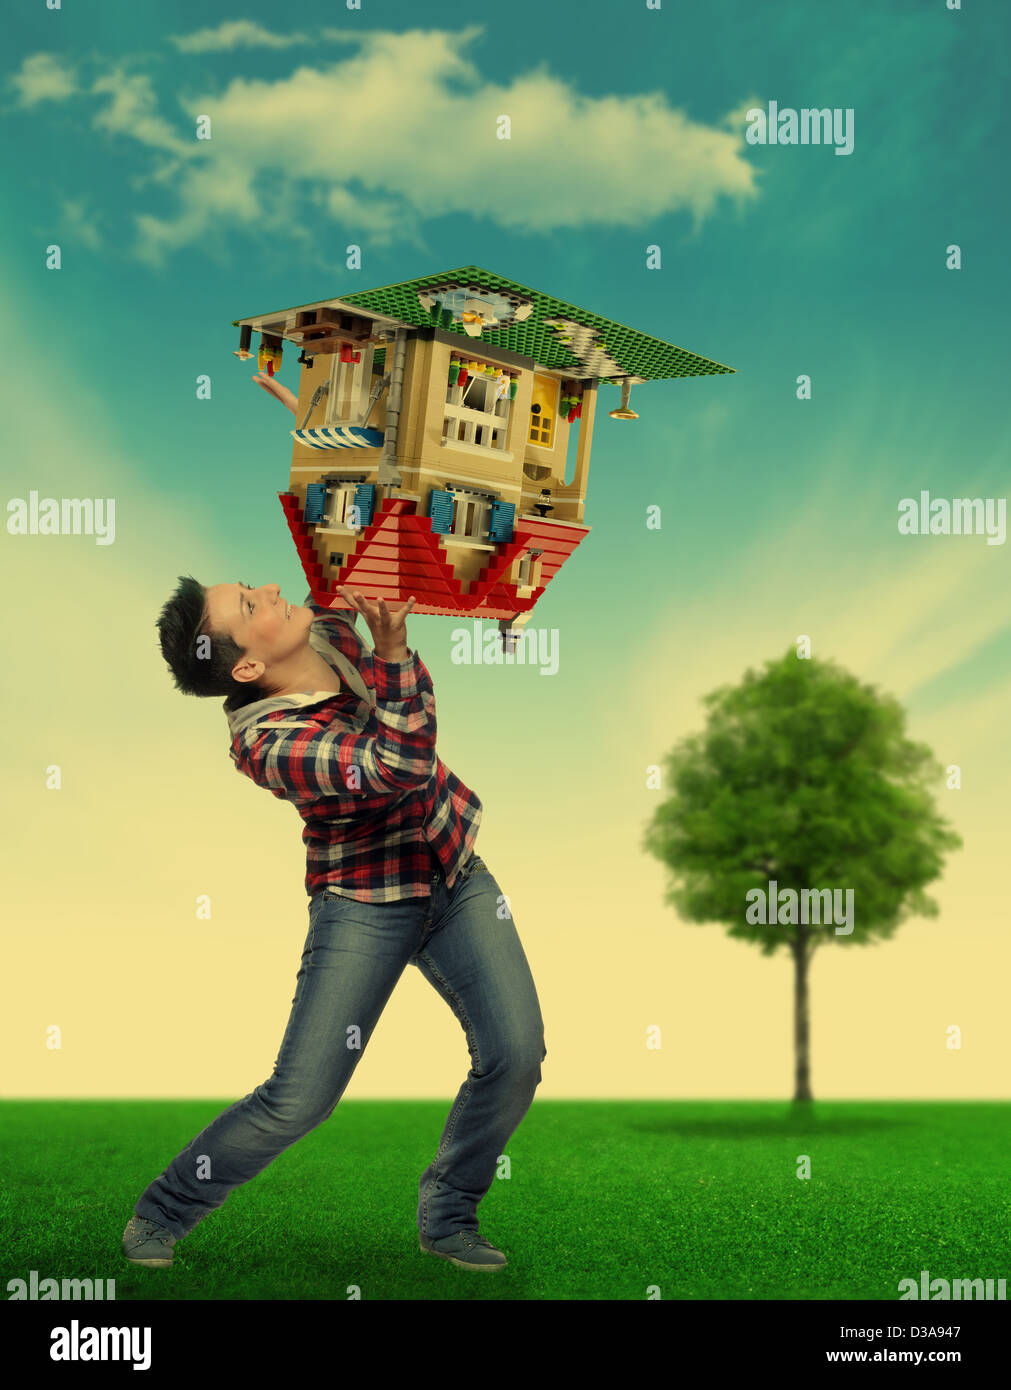 woman holding up with difficulty a small model house Stock Photo